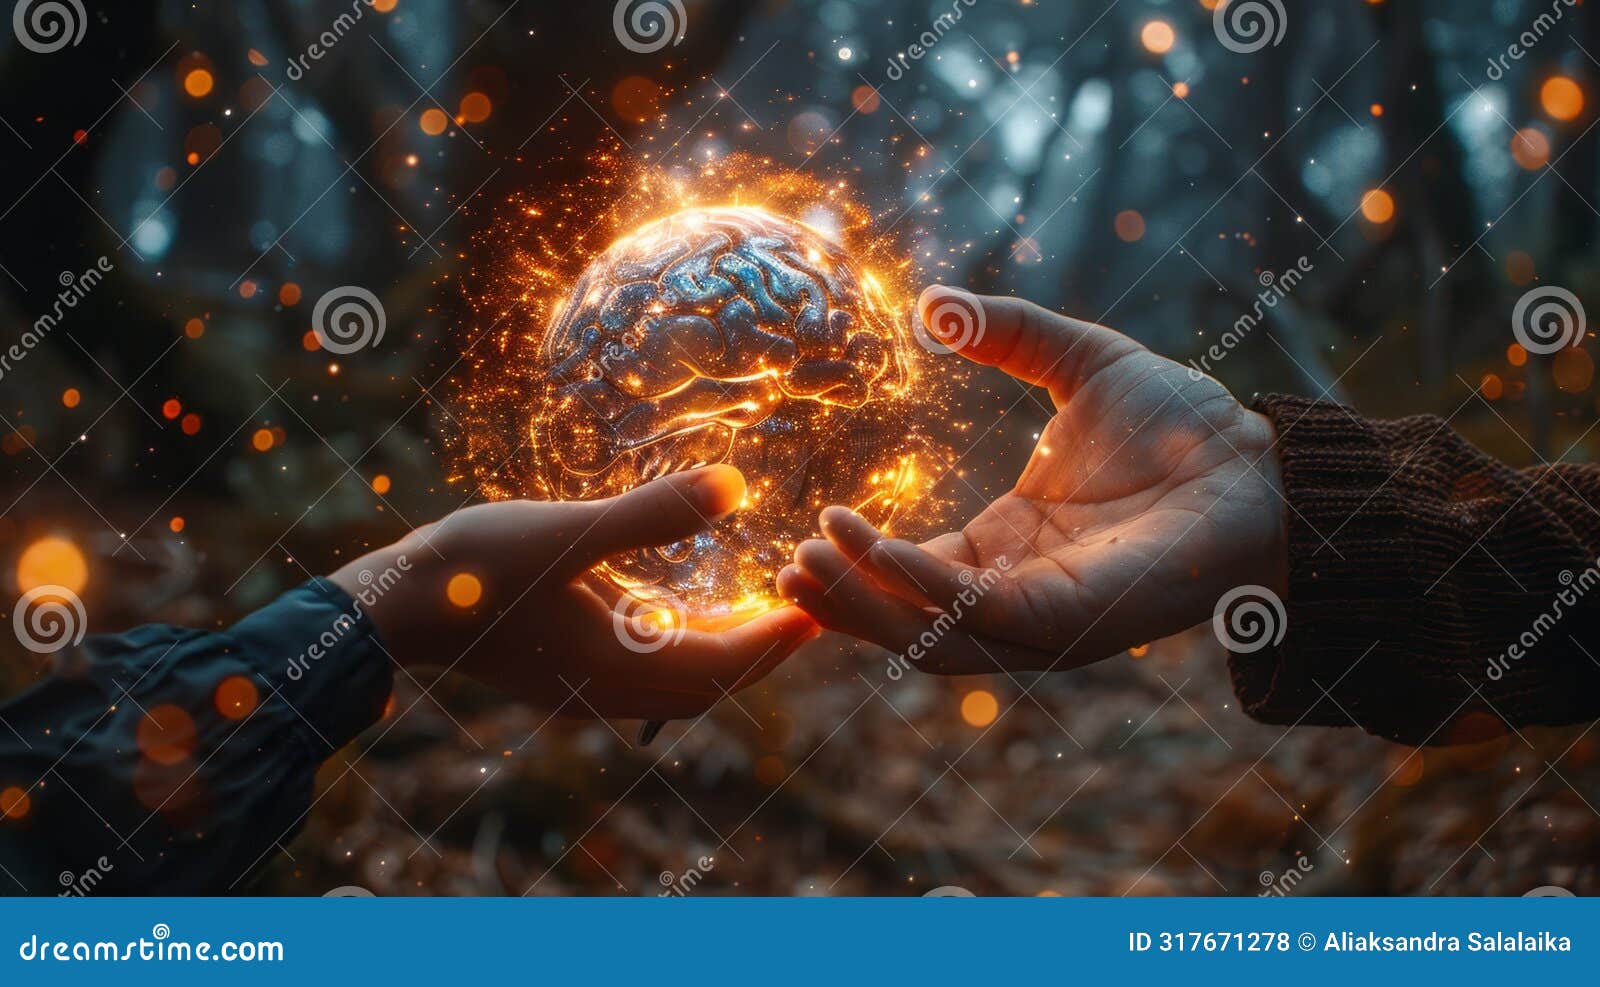 image of crystal ball connecting two minds, visualizing telepathic communication concept with brain waves, powerful